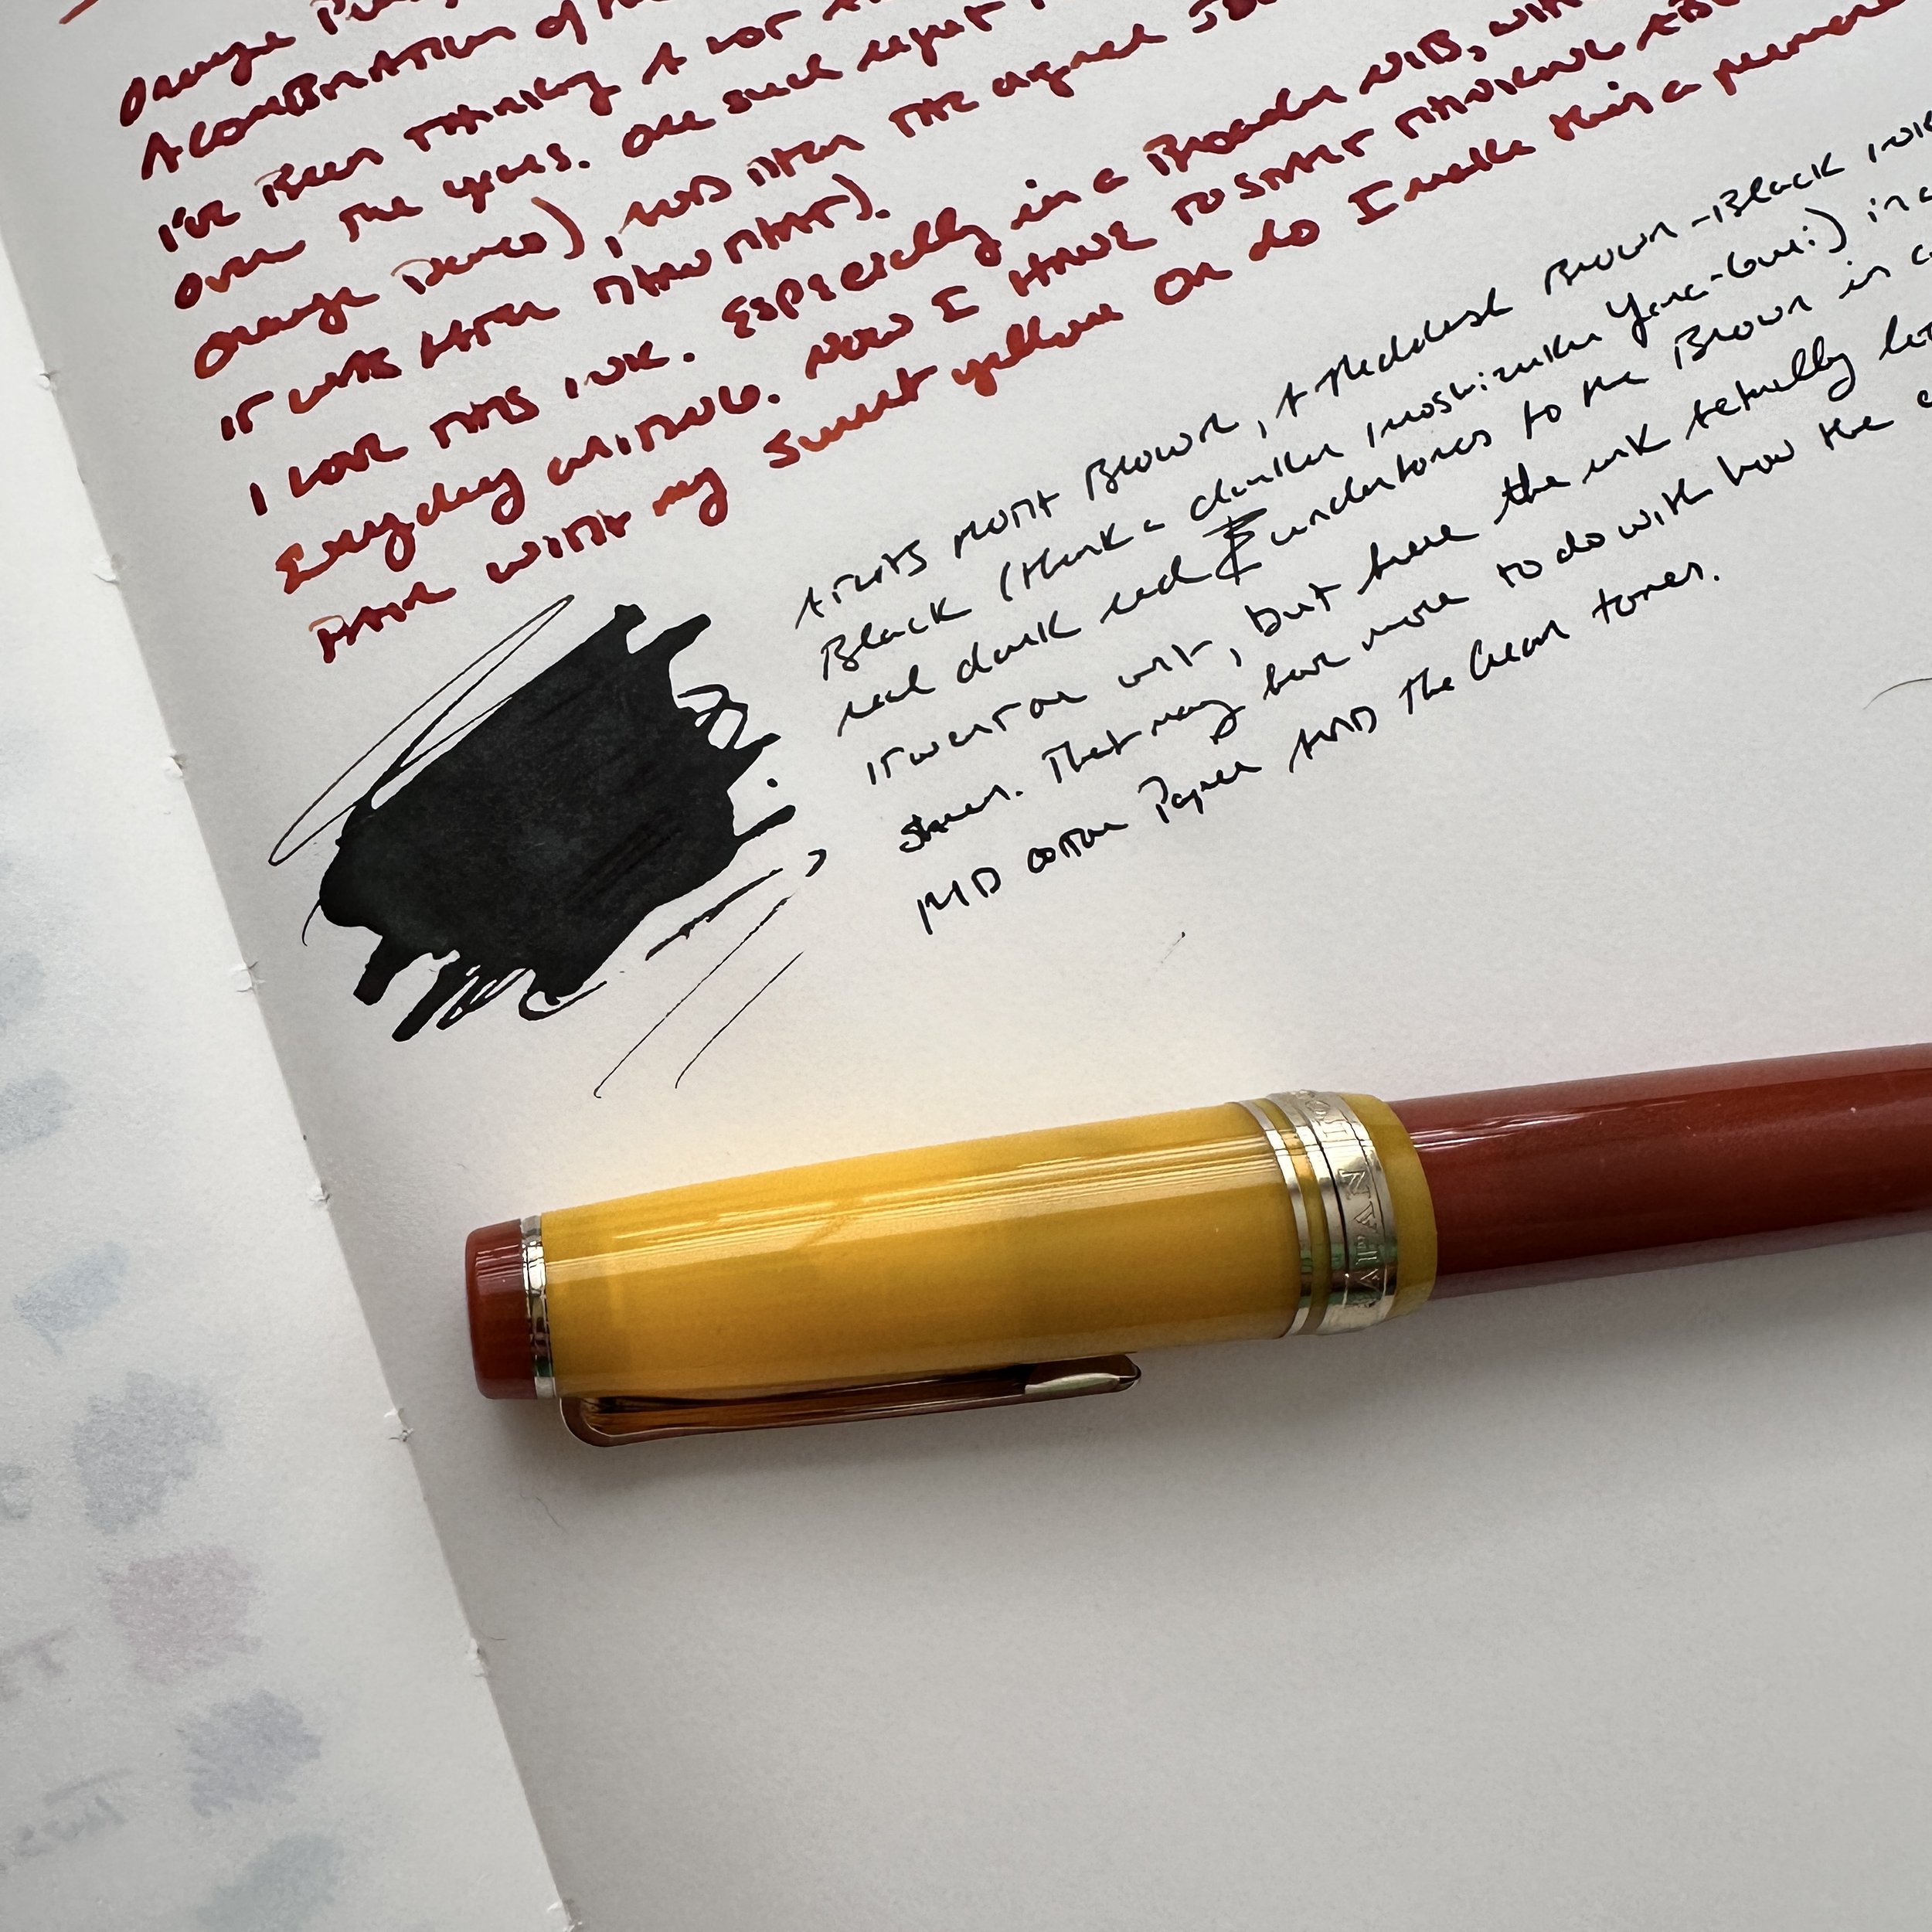 11 Best-Behaved Fountain Pen Inks (for Each Color) - One Pen Show